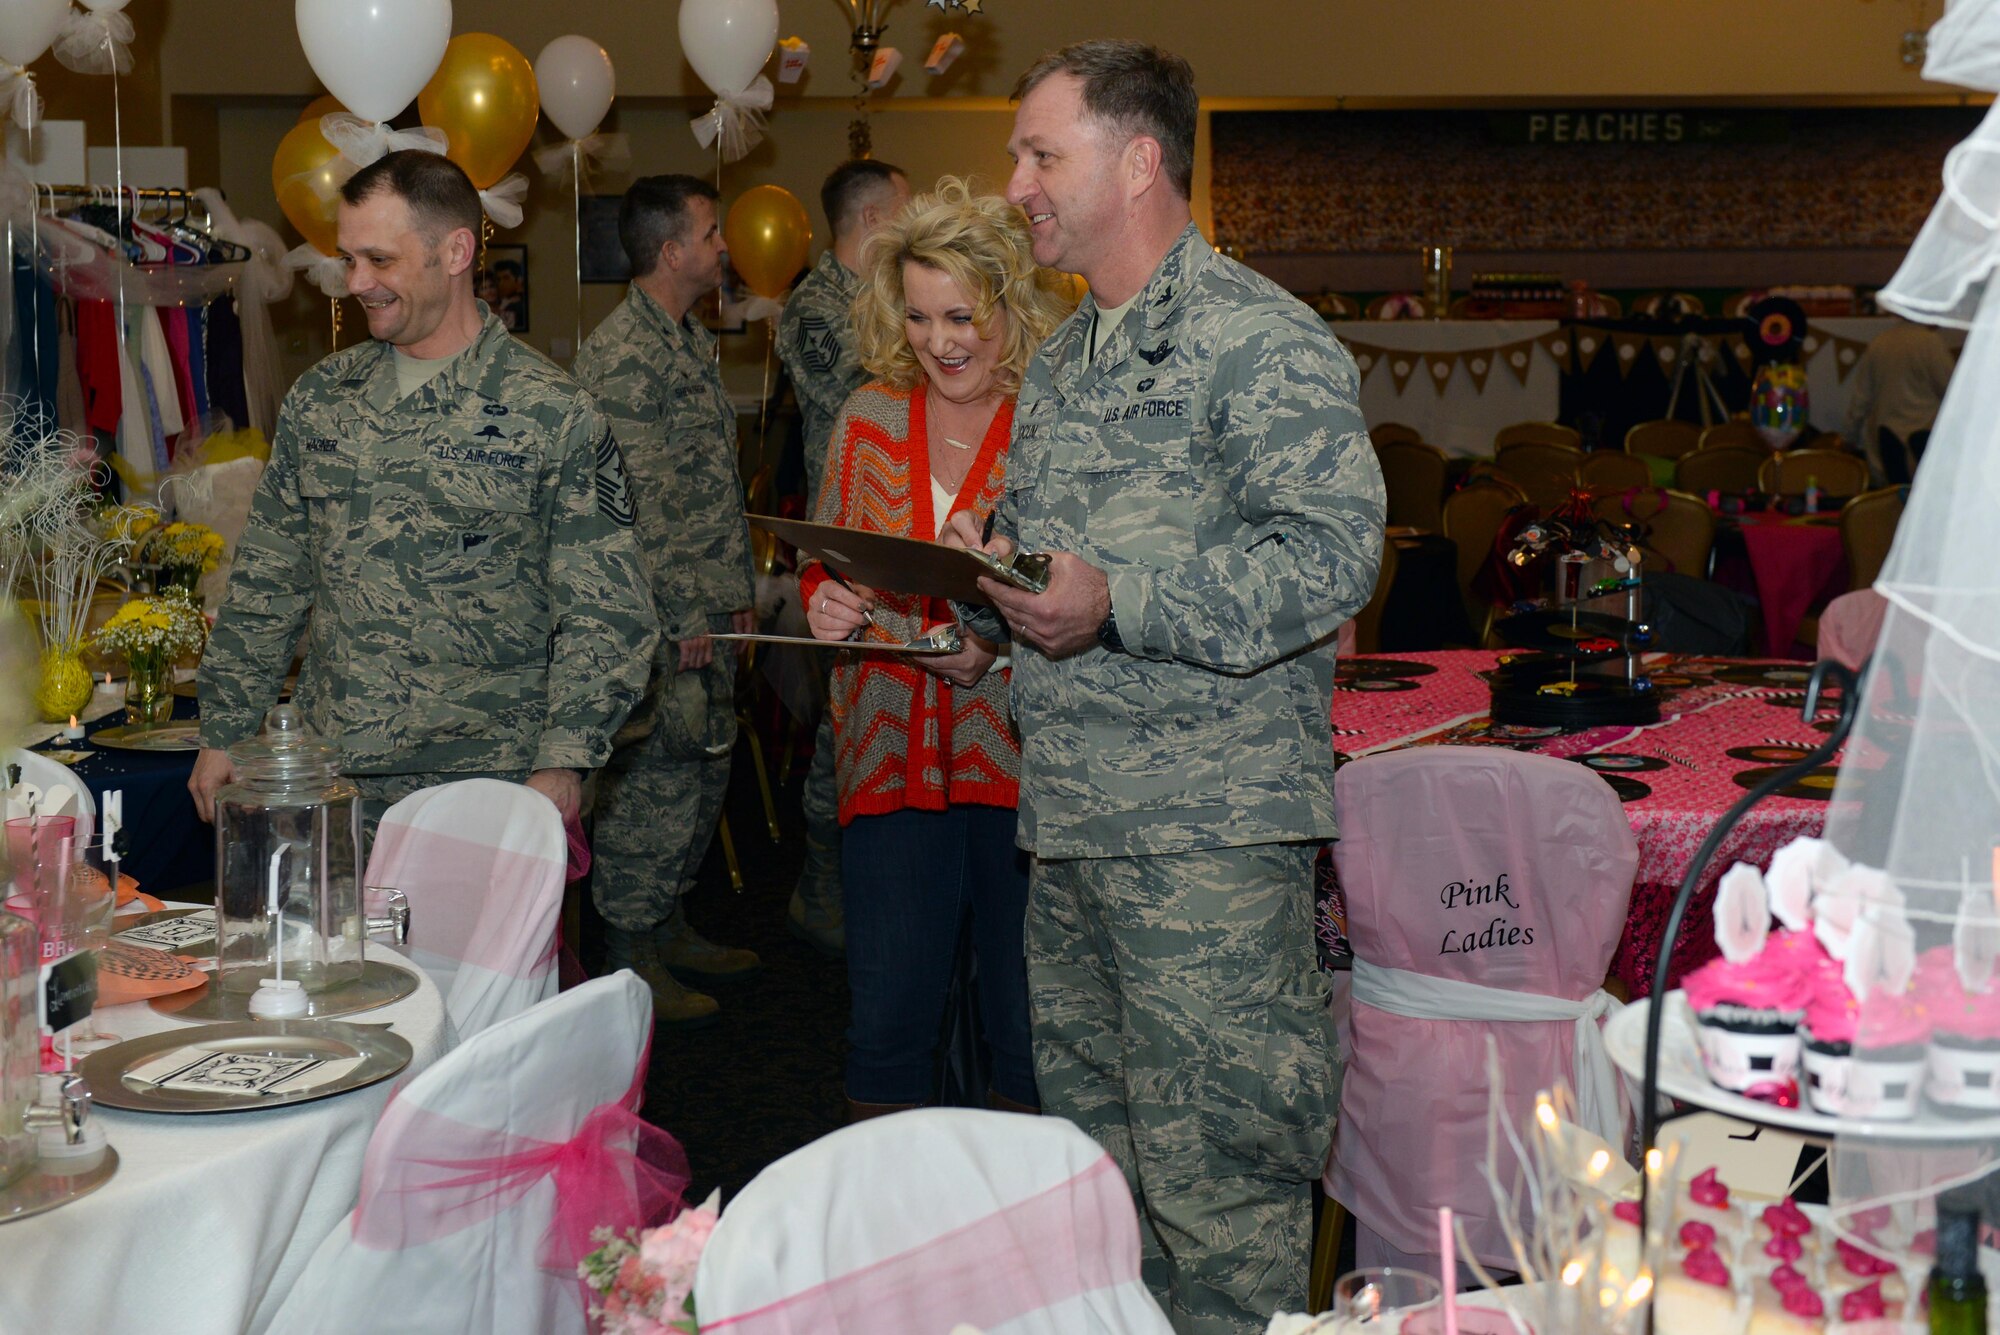 Chief MSgt. Shane Wagner (left), 4th Fighter Wing command chief, Sarah Merritt (center), the Arts Council of Wayne County executive director, and Col. Mark Slocum (right), 4th Fighter Wing commander, judge tables for the inaugural Spouses Dining-in, March 5, 2016, at Seymour Johnson Air Force Base, North Carolina. The tables were judged on elements such as creativity, hand-made items and originality. (U.S. photo/Airman 1st Class Ashley Williamson)